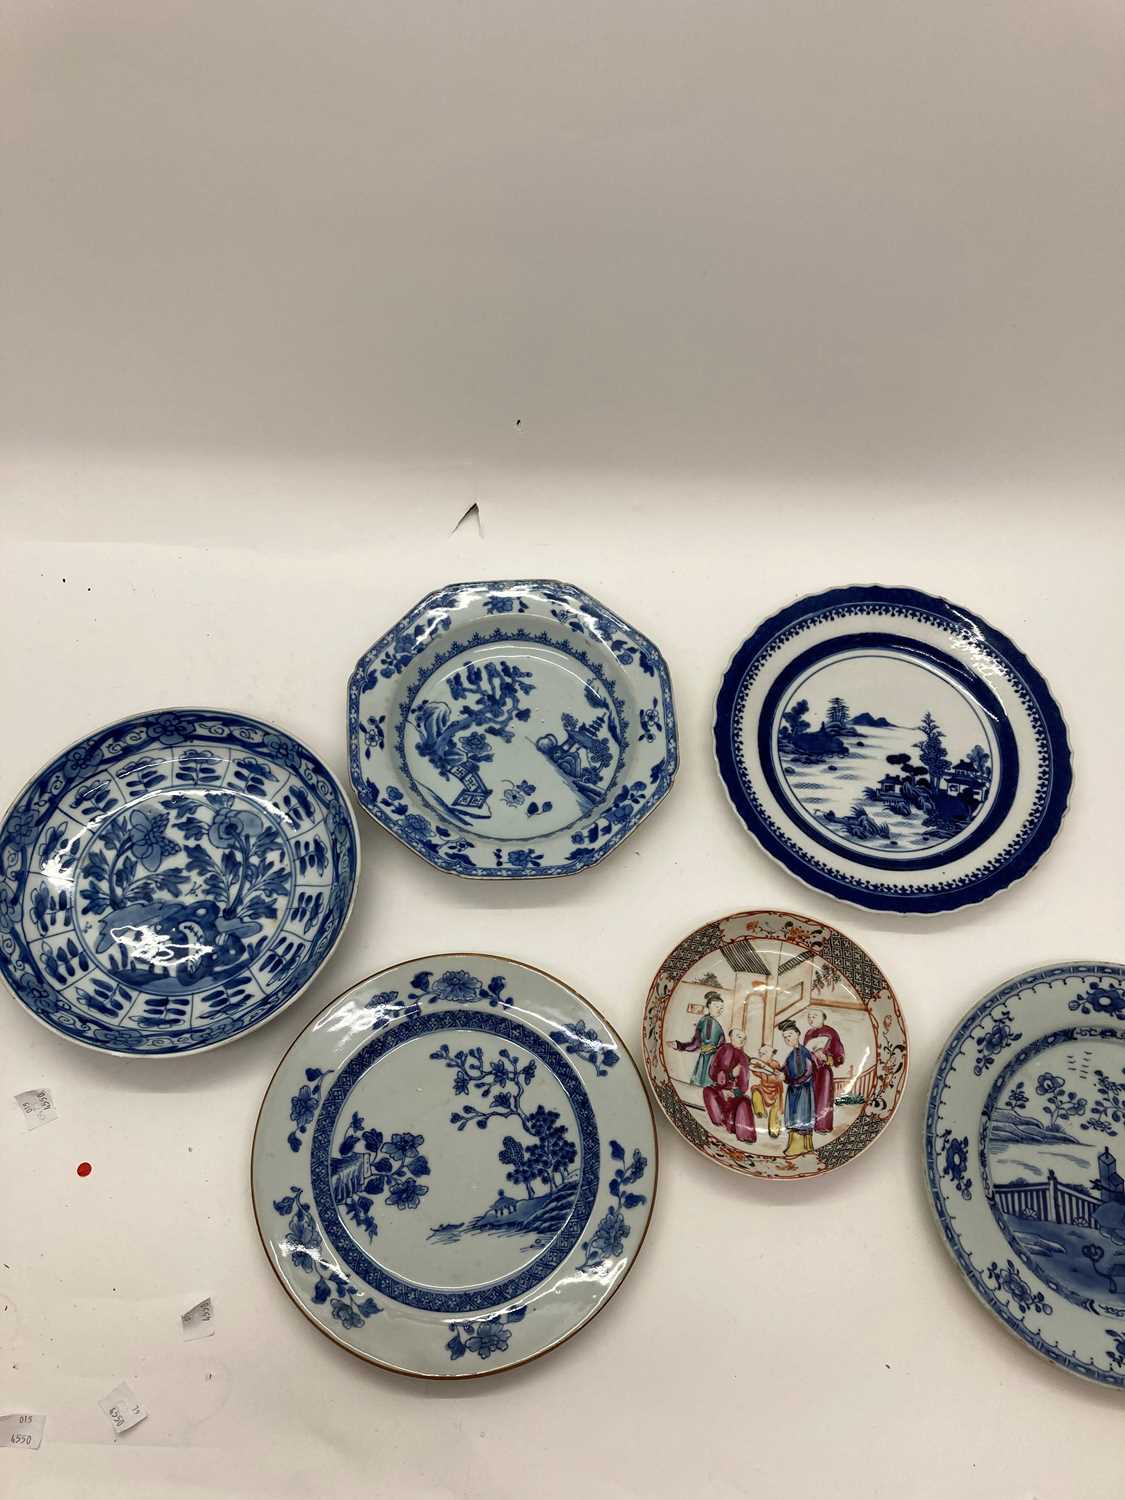 A collection of Chinese export porcelain, - Image 17 of 29